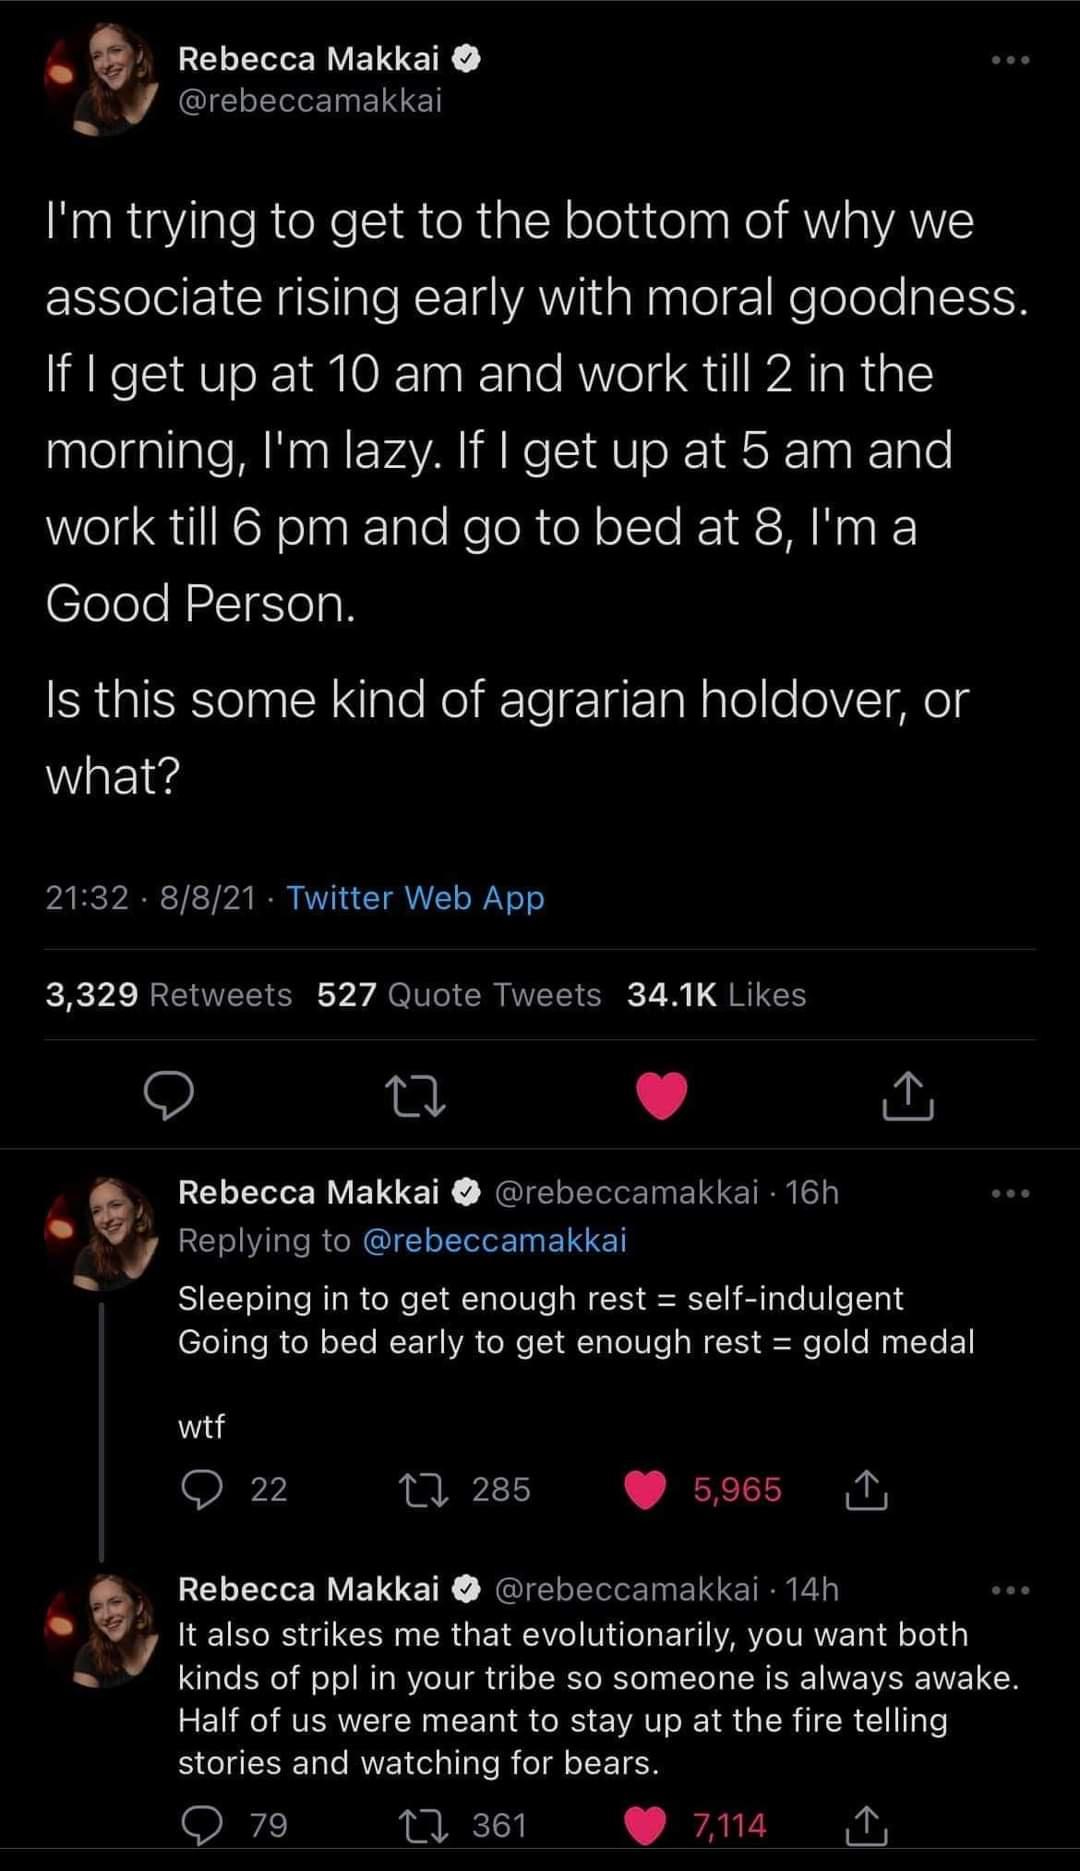 screenshot - Rebecca Makkai I'm trying to get to the bottom of why we associate rising early with moral goodness. If I get up at 10 am and work till 2 in the morning, I'm lazy. If I get up at 5 am and work till 6 pm and go to bed at 8, I'm a Good Person. 